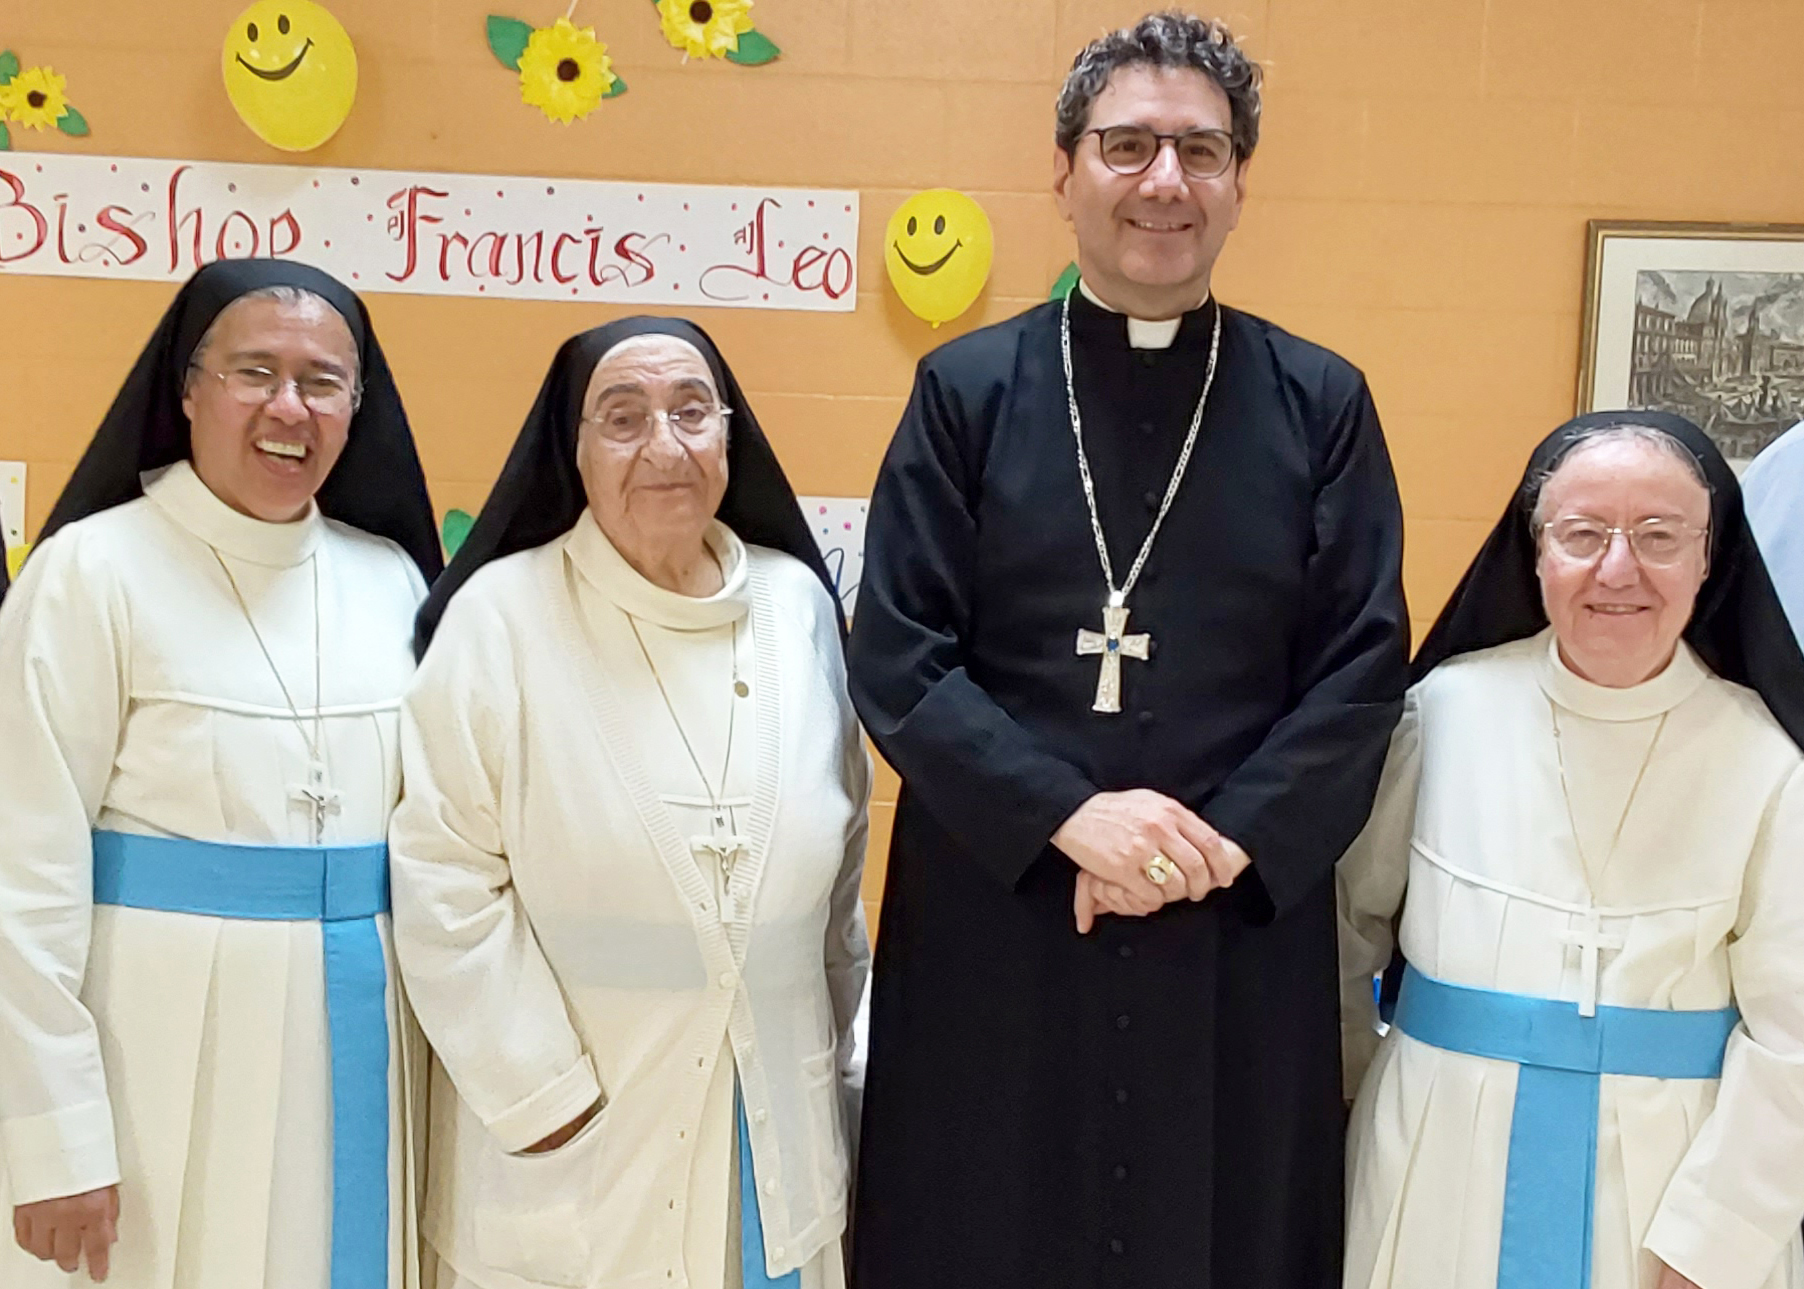 Archbishop Leo meets the Daughters of St. Mary